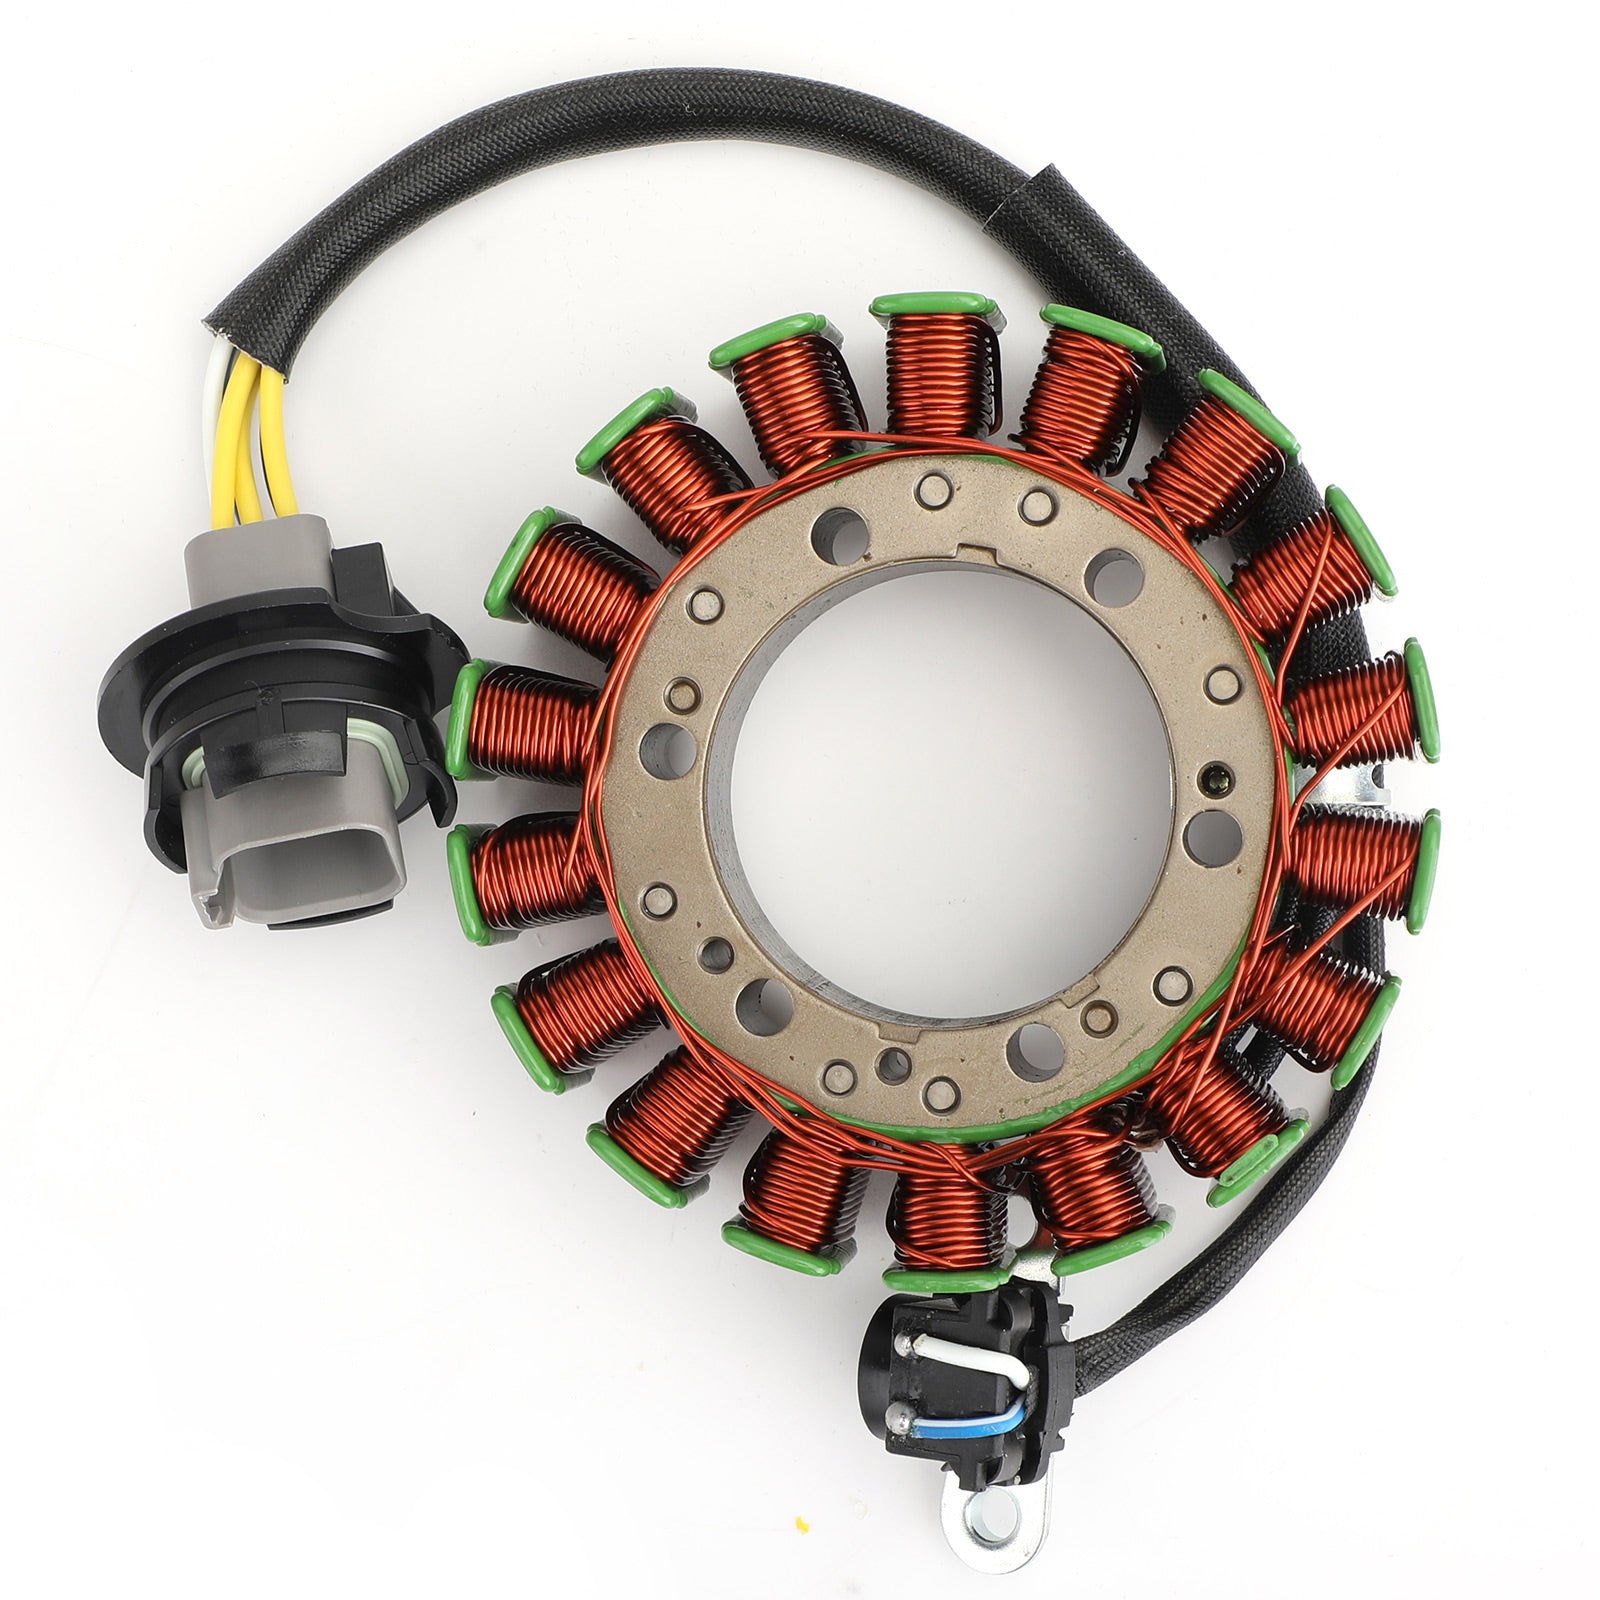 Alternator Stator For Can-Am Traxter 500 650 99-05 MAX 500 650 03-05 420296321 Generic Fedex Express Shipping